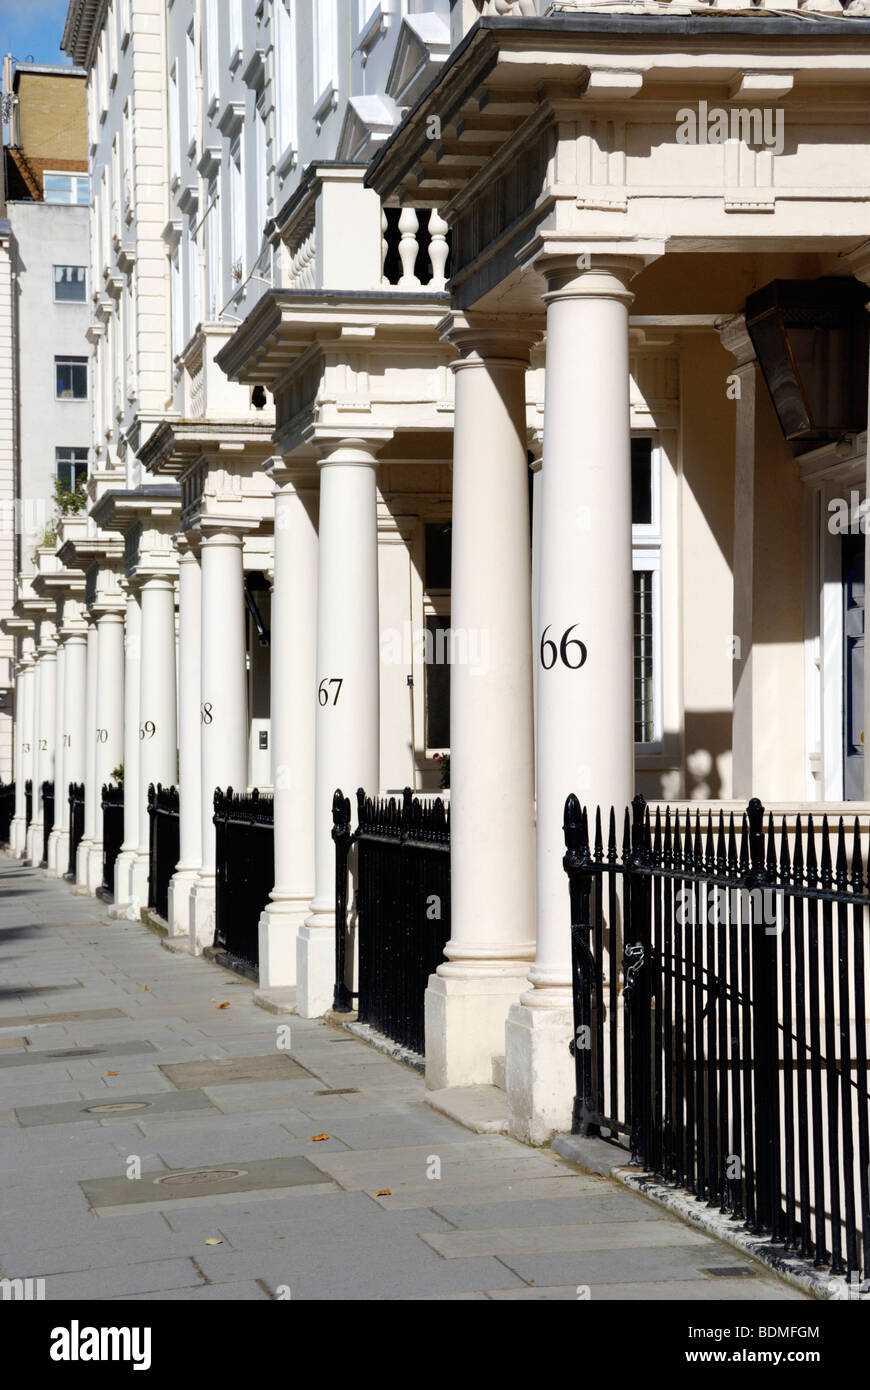 Numbered stone columns outside elegant Victorian terraced houses in Eccleston Square, Victoria, London, England Stock Photo